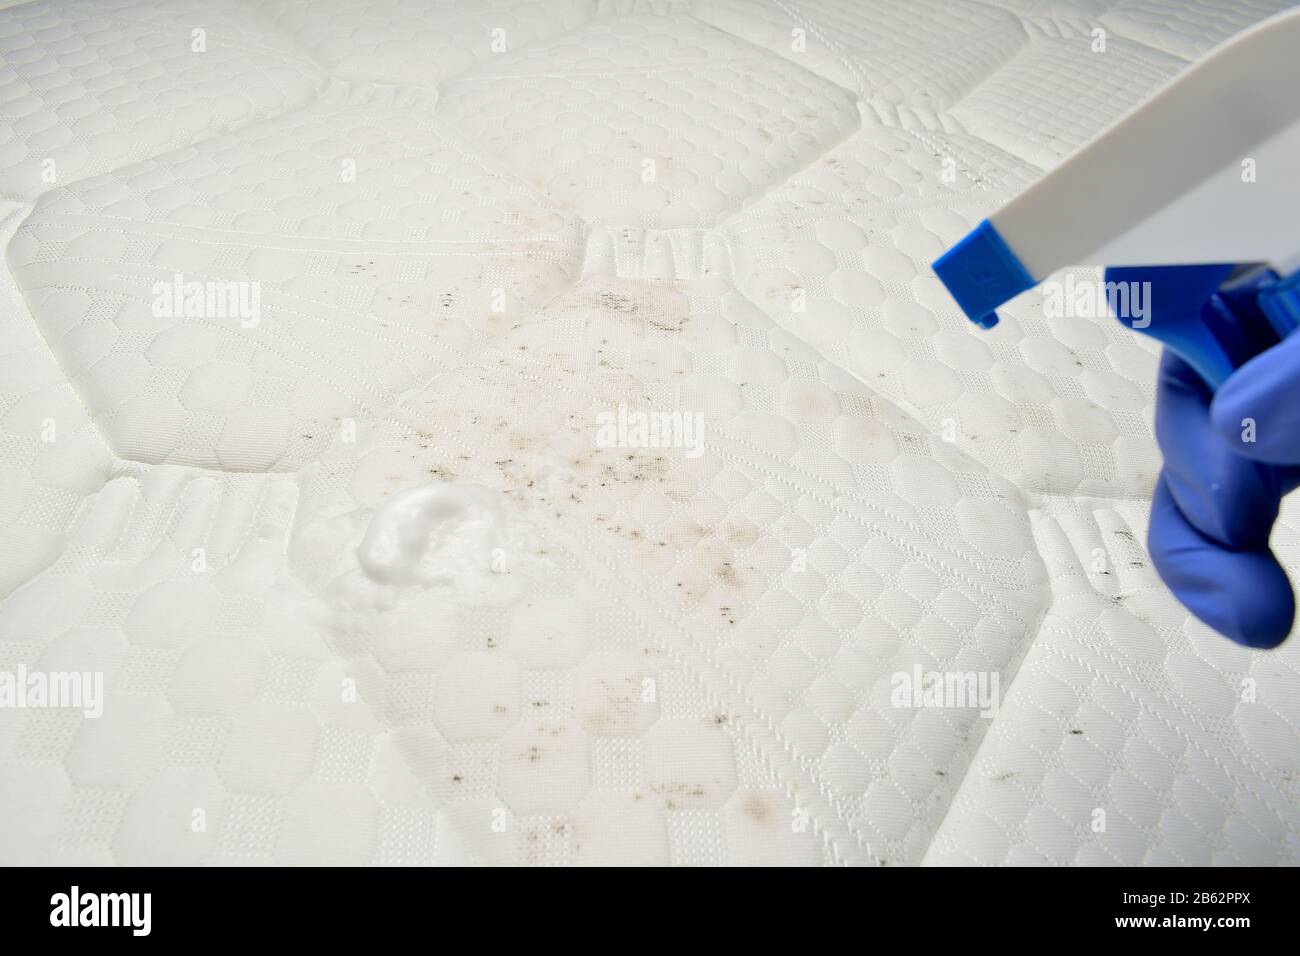 Mattress cleaner spray. Cleaning a mattress cloth with a foam stain remover.  Hand pulls a trigger Stock Photo - Alamy